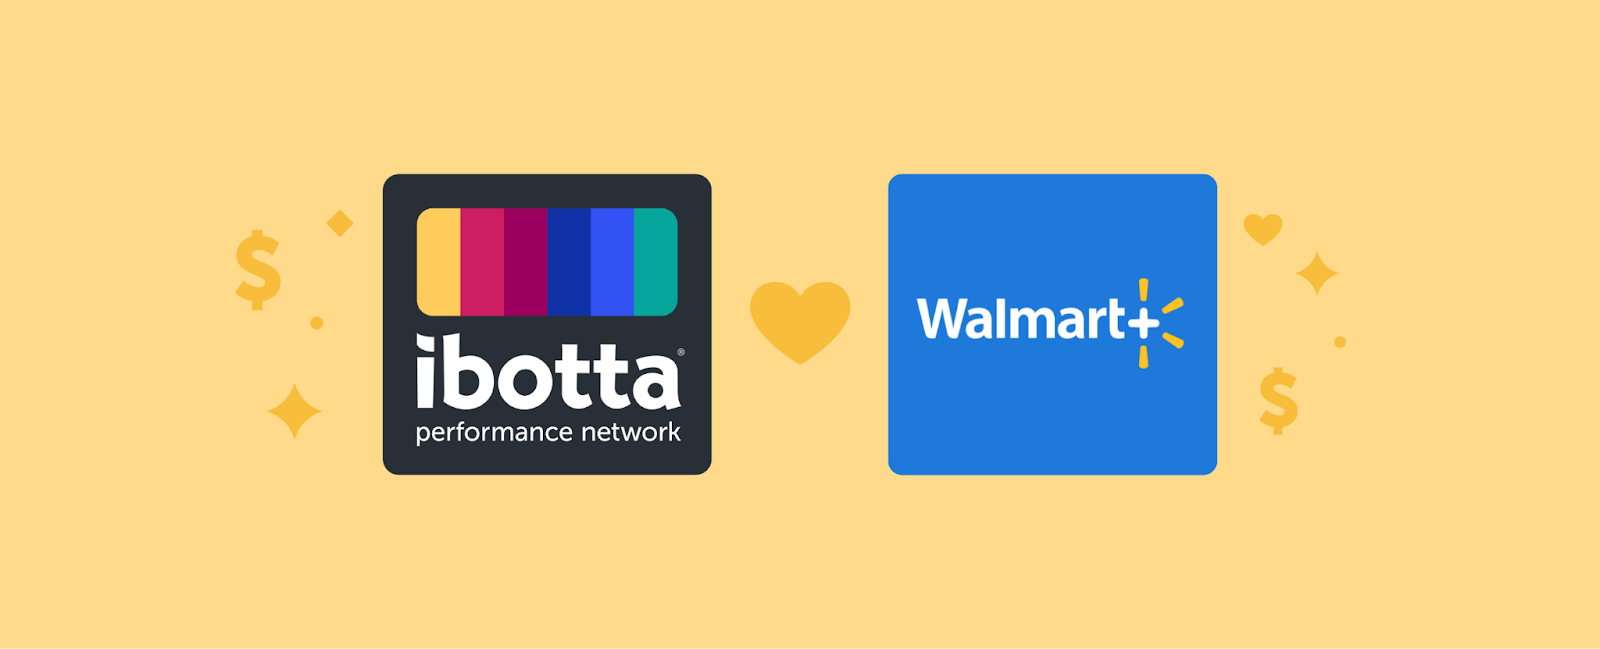 Live now: Walmart Rewards with digital offers powered by the Ibotta Performance Network